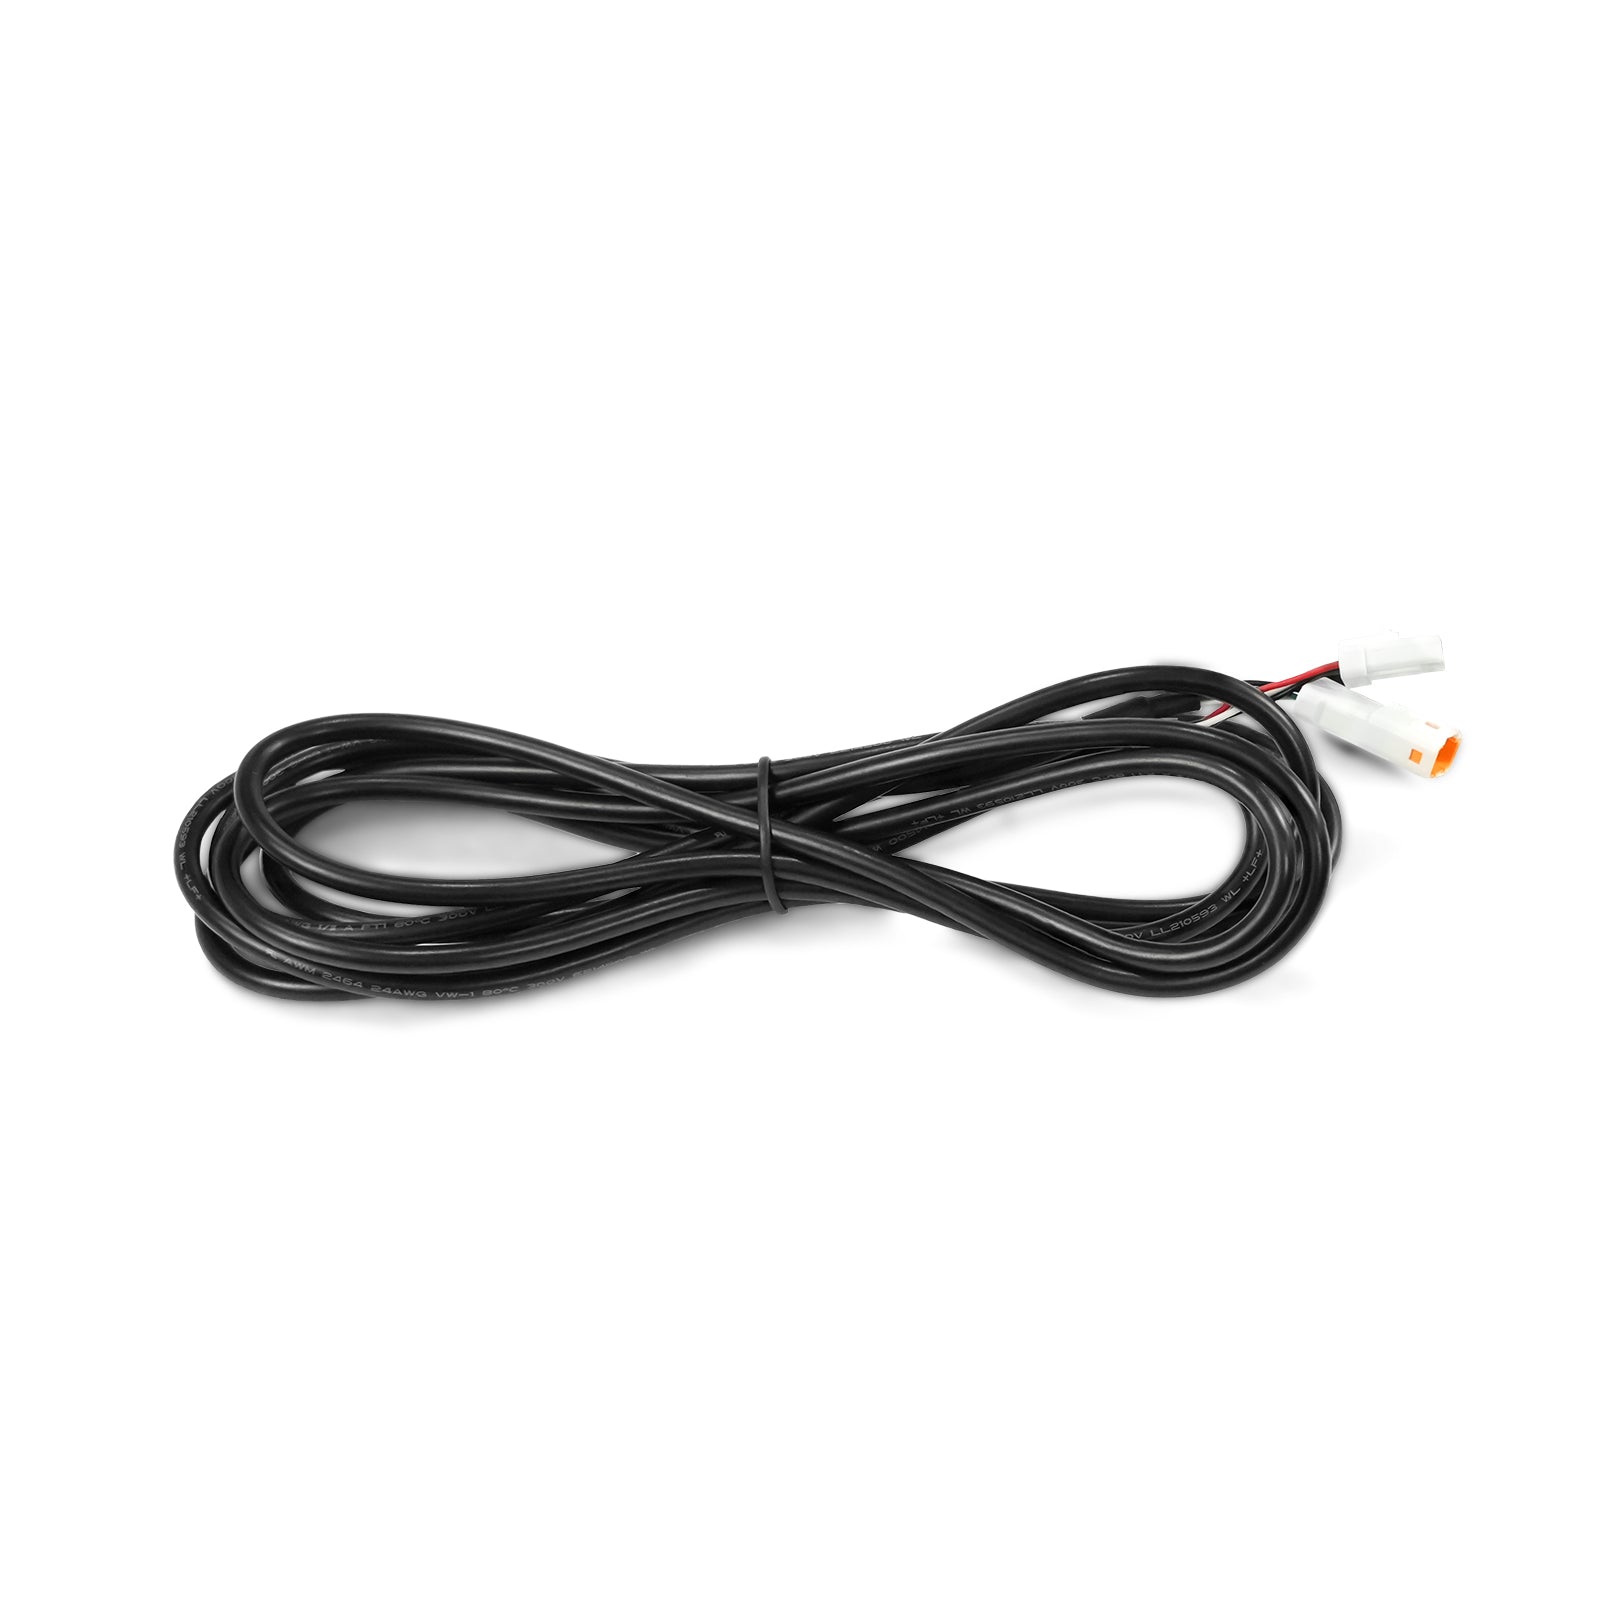 Handheld/Dash Extension Cable